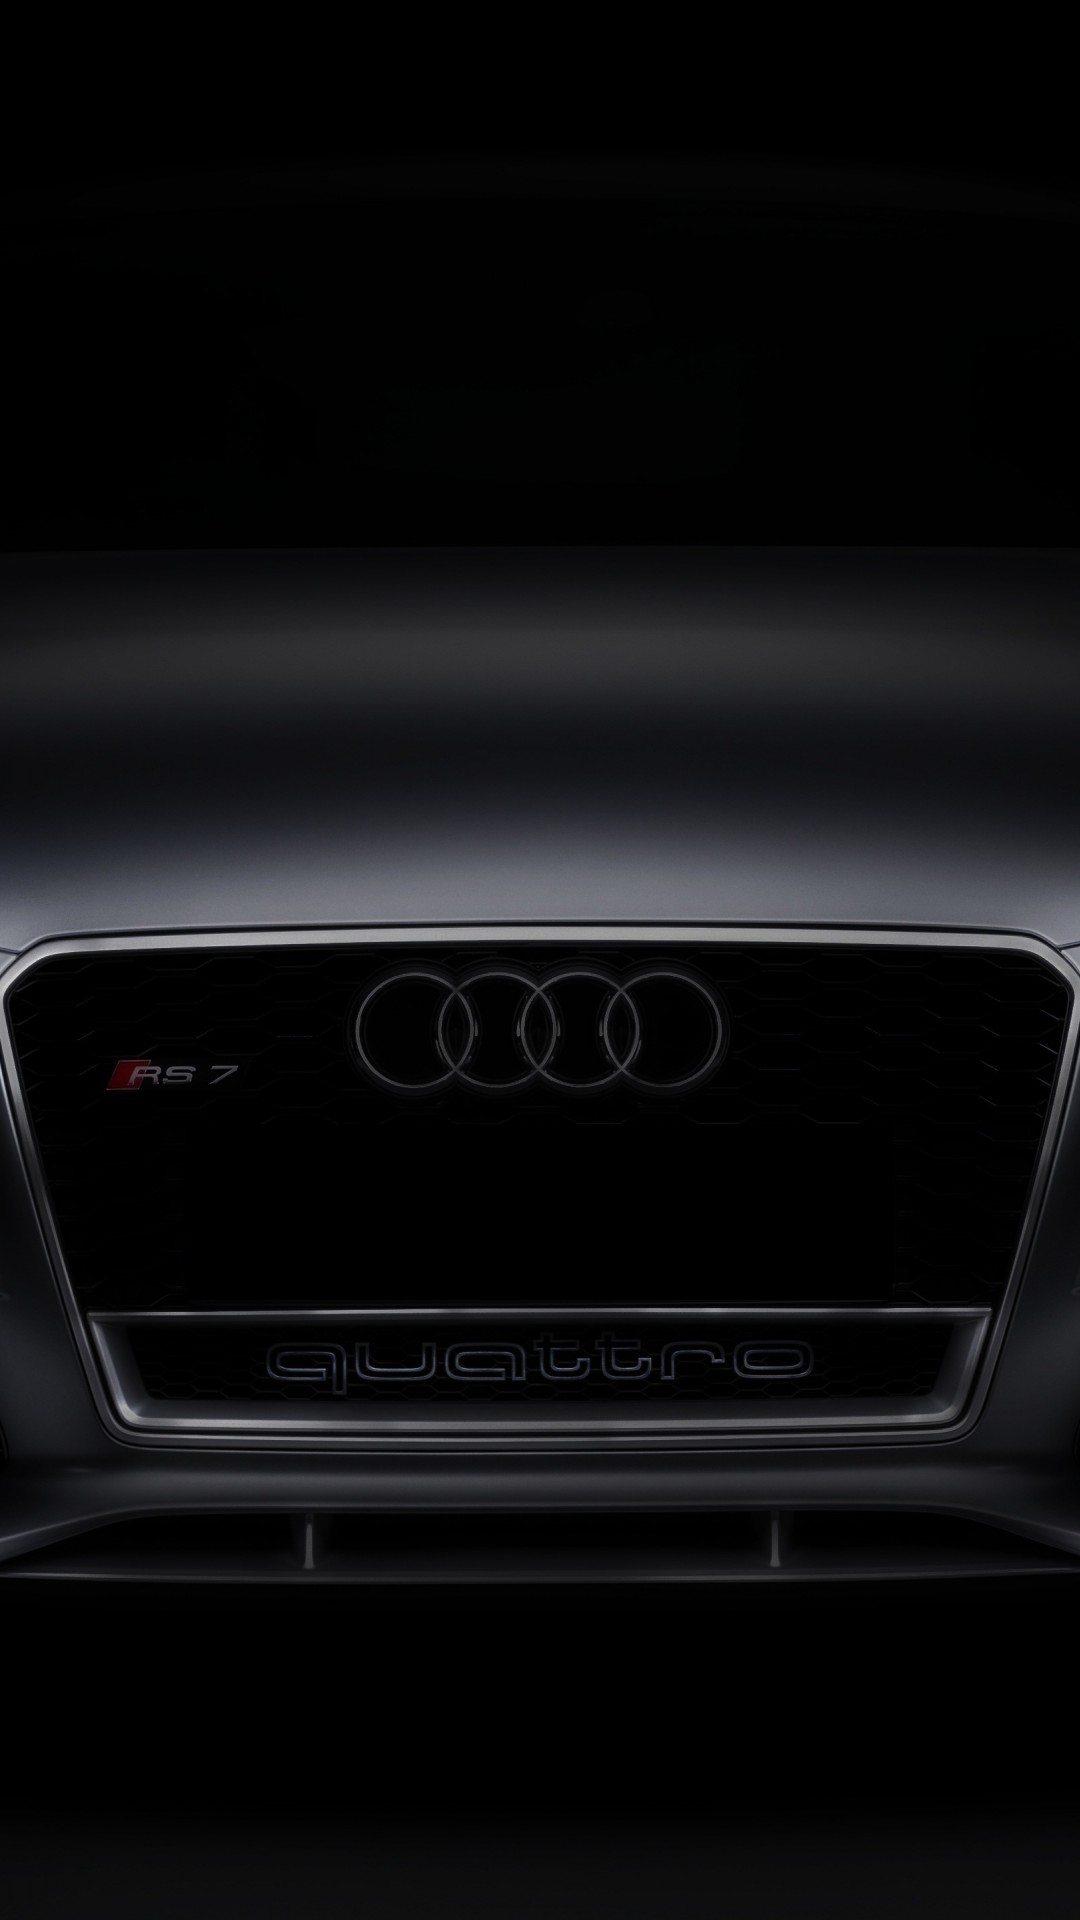 Download wallpaper 1280x2120 offroad car red audi rs7 iphone 6 plus  1280x2120 hd background 22552